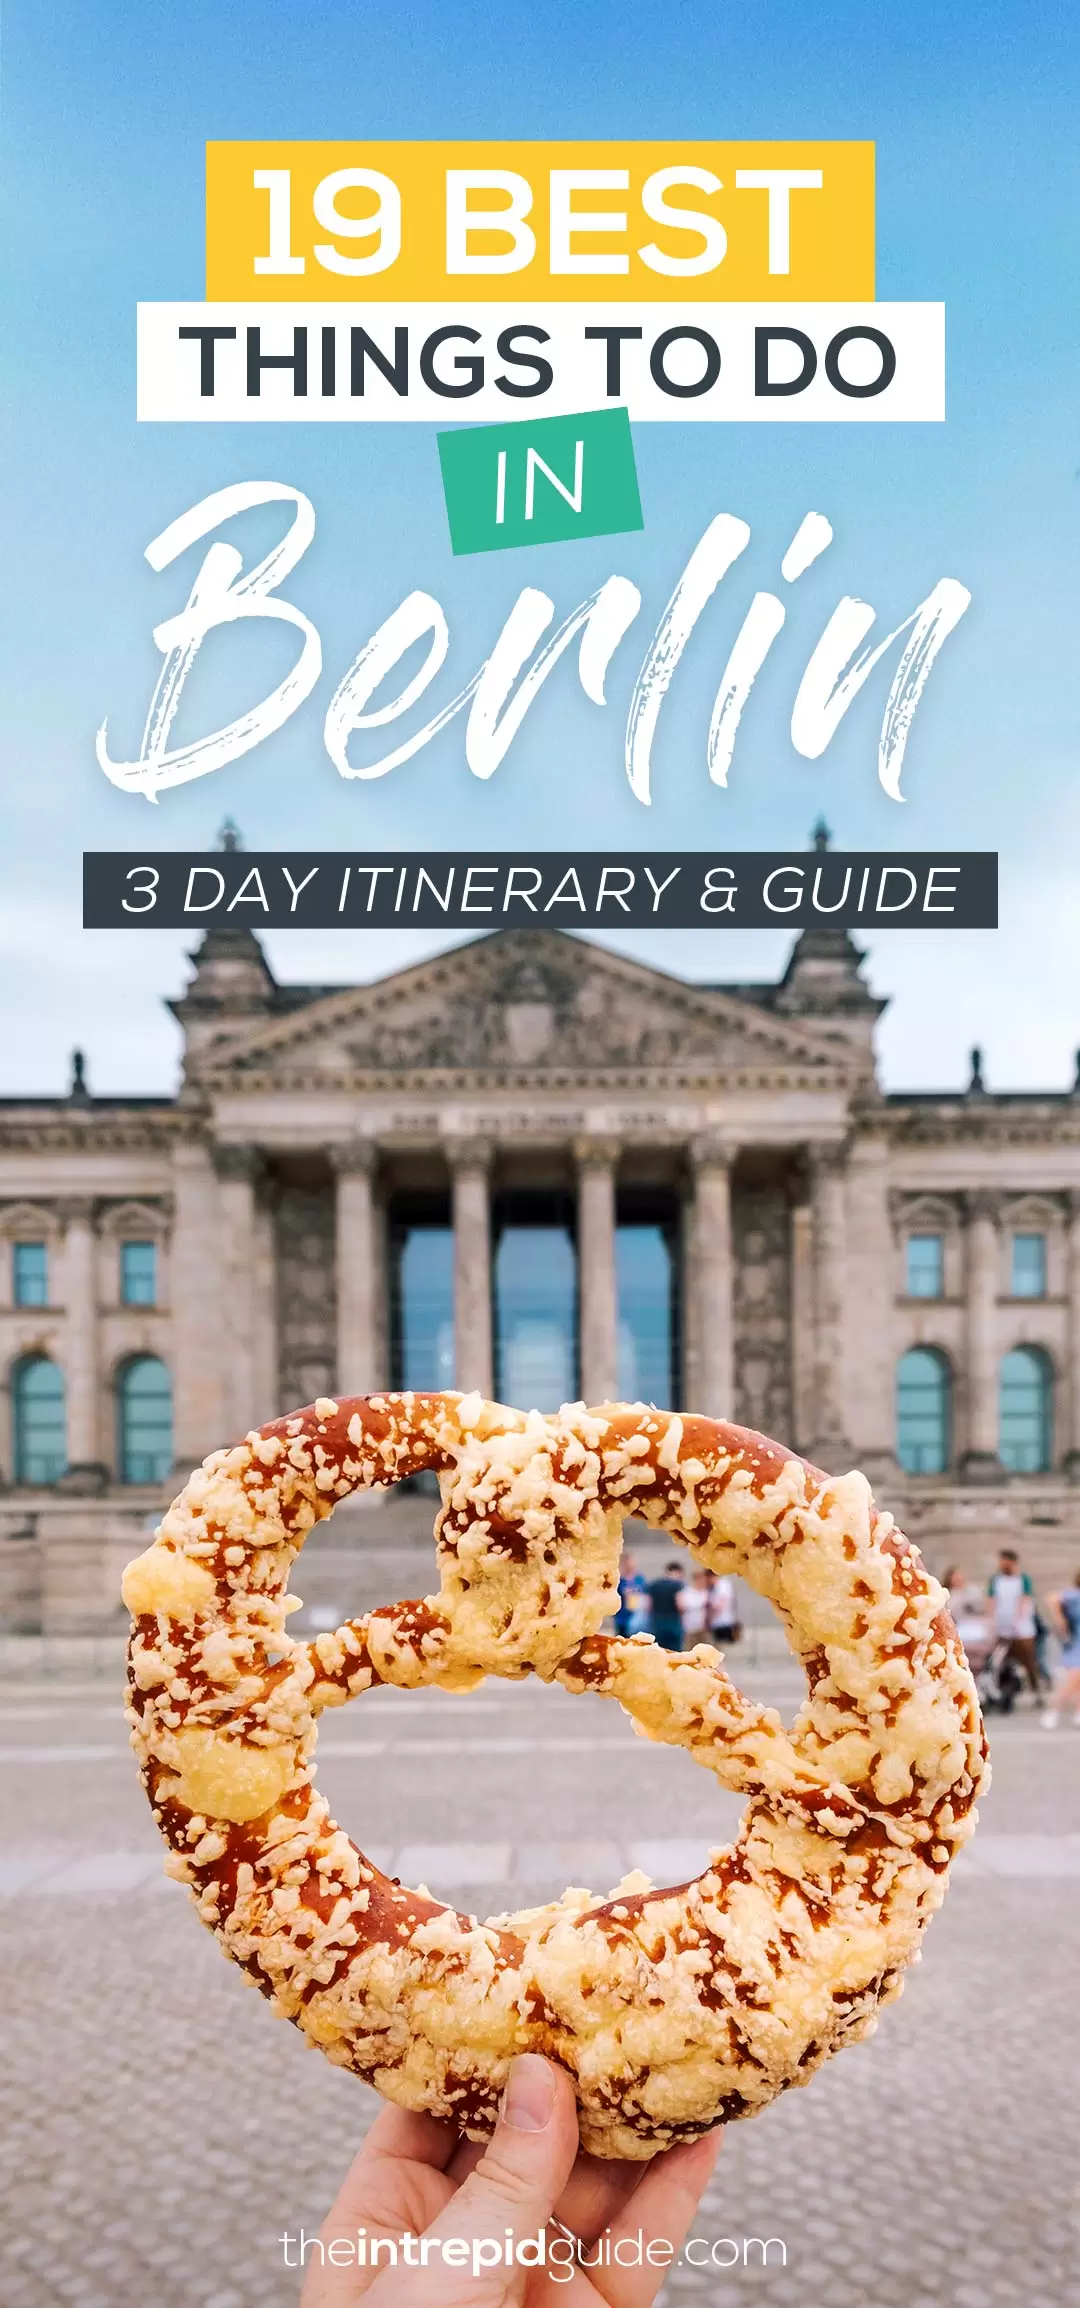 3 Days in Berlin Itinerary - 19 Absolute Best Things to do in Berlin